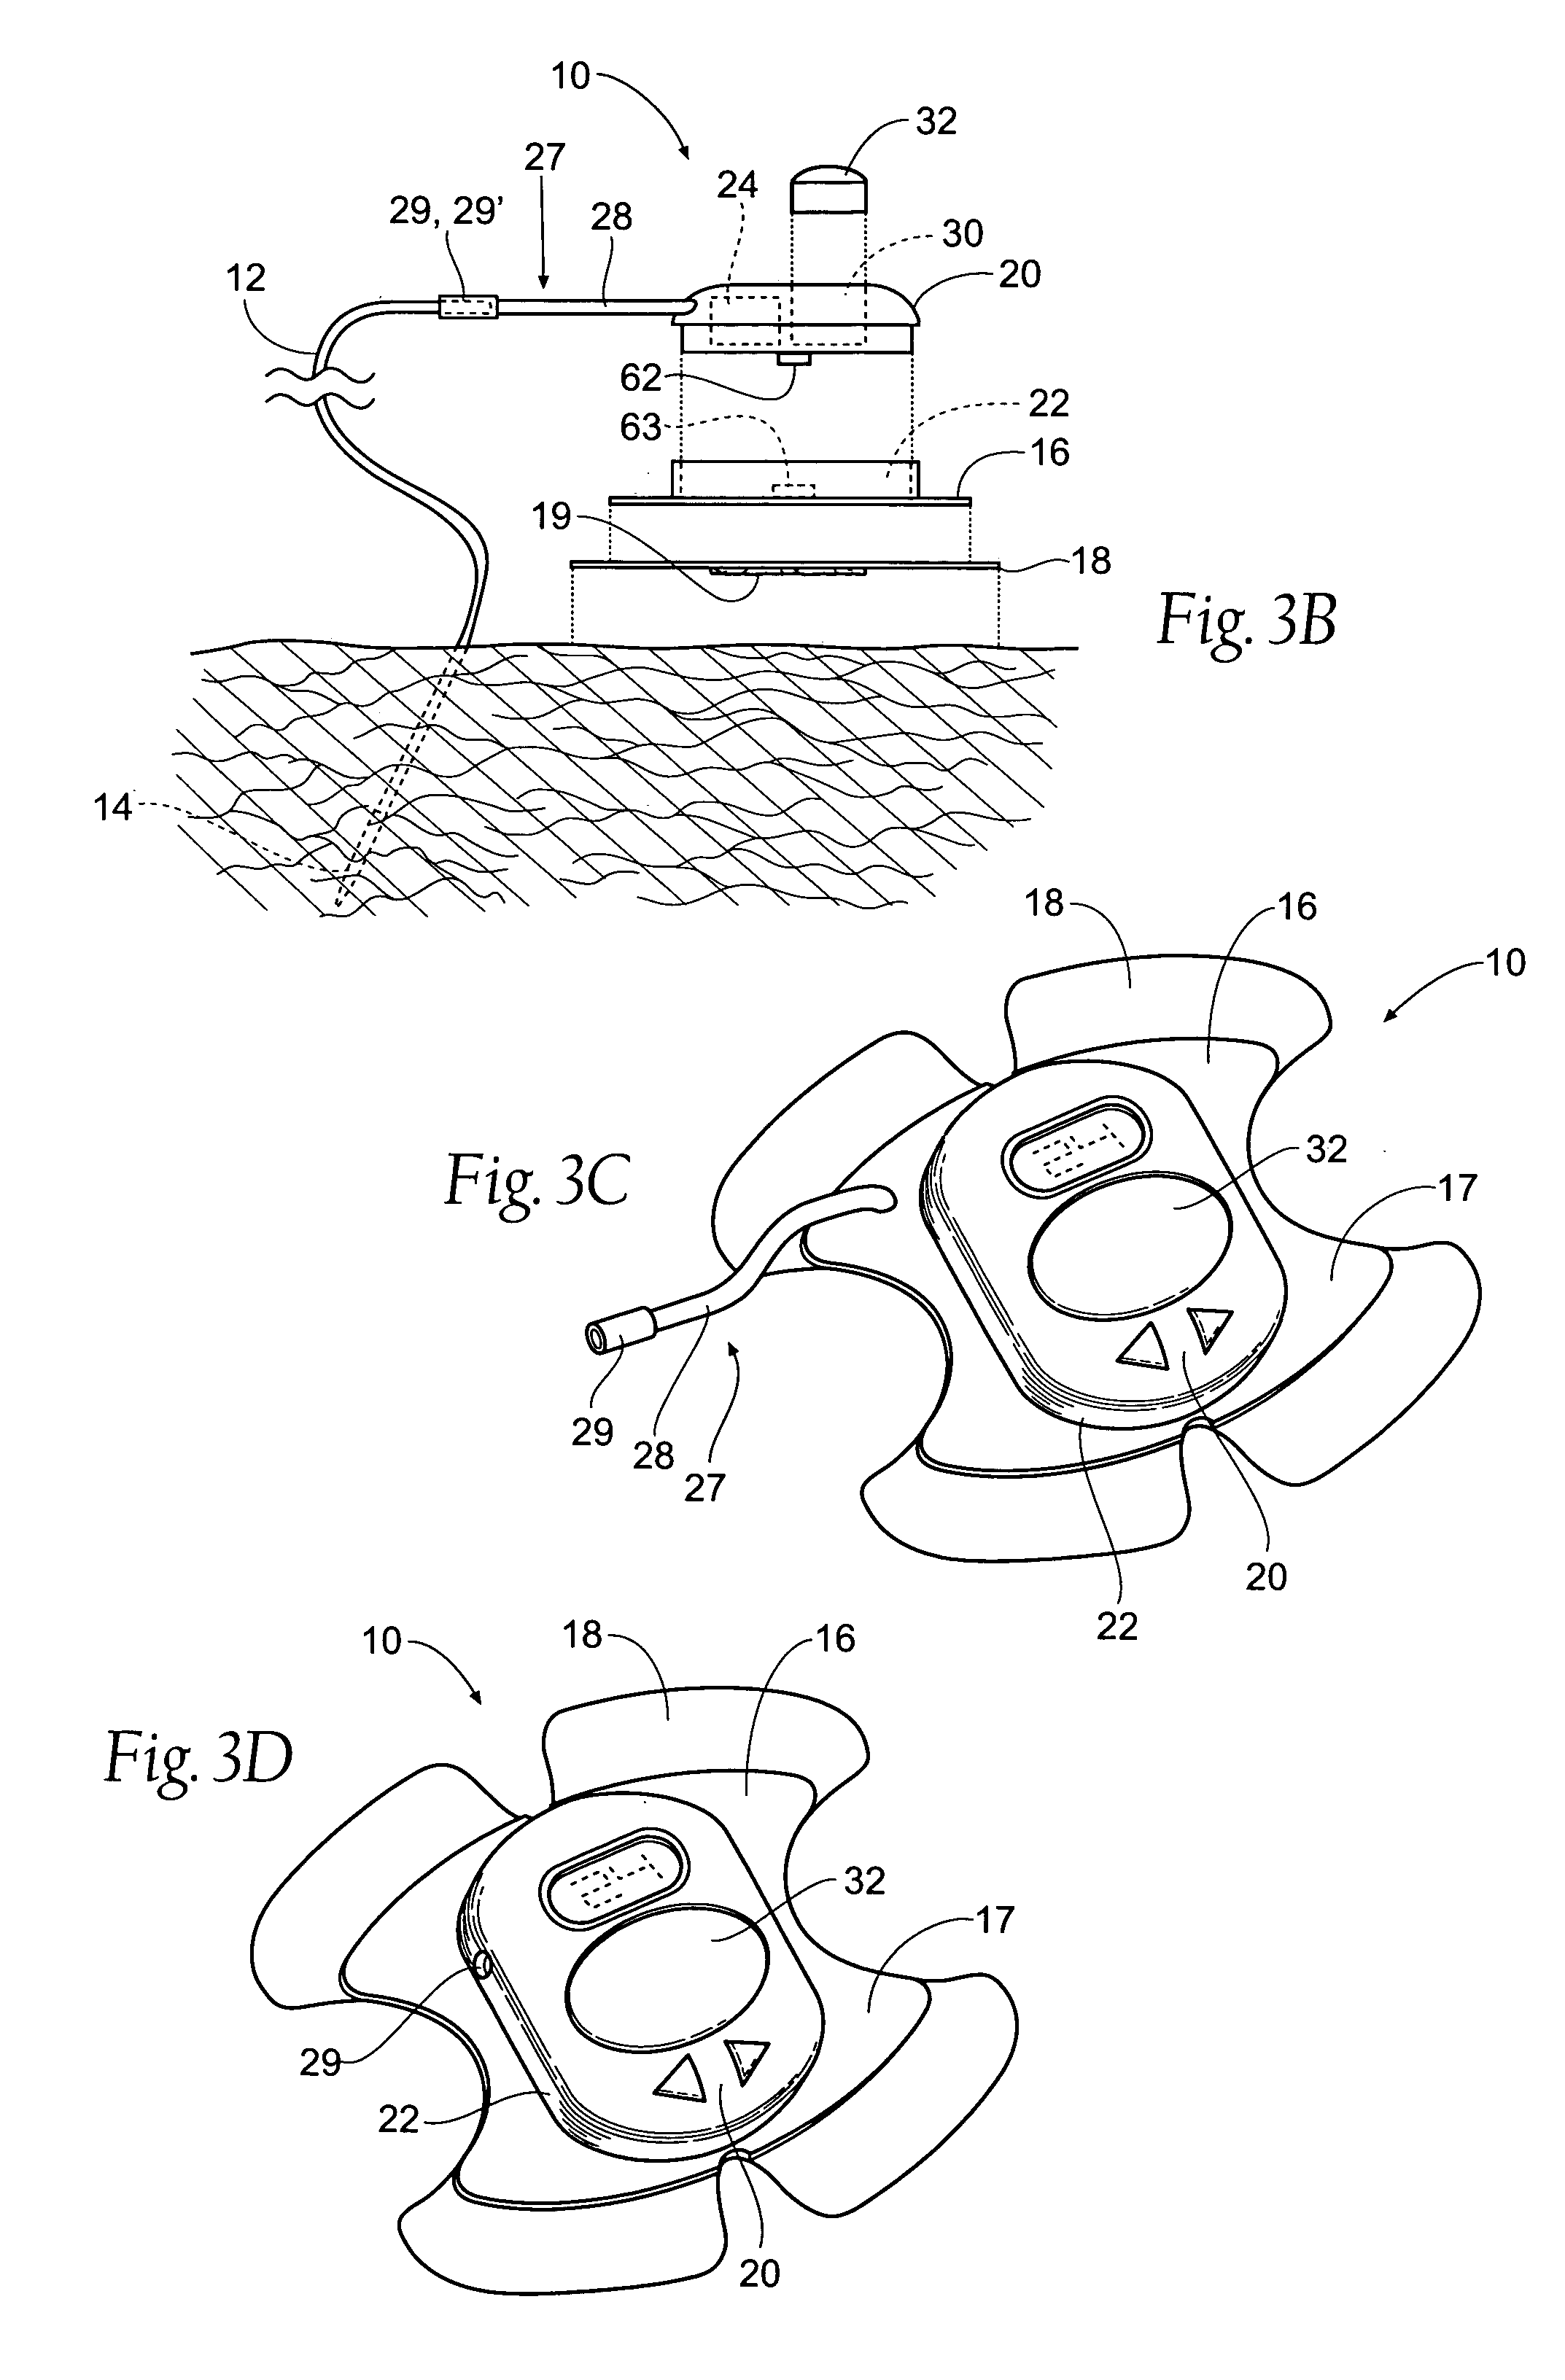 Portable assemblies, systems, and methods for providing functional or therapeutic neurostimulation